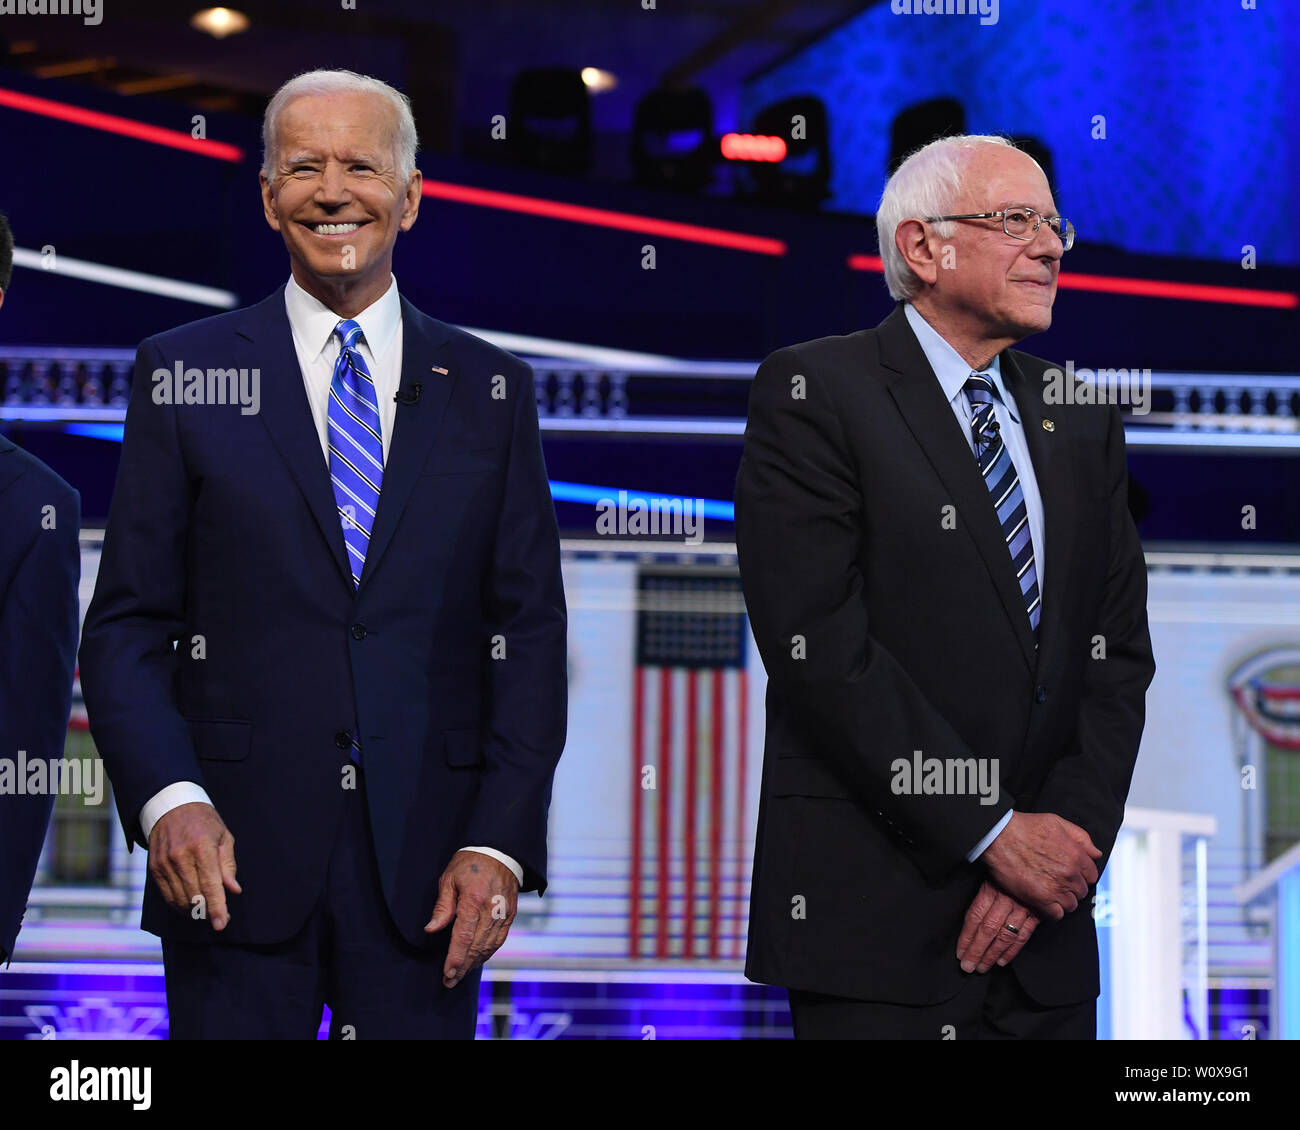 Miami, FL, USA. 27th June, 2019. Joe Biden and Bernie Sanders attend the 2020 Democratic Party presidential debates held at The Adrienne Arsht Center on June 27, 2019 in Miami Florida. Credit: Mpi04/Media Punch ***No Ny Newspapers***/Alamy Live News Stock Photo